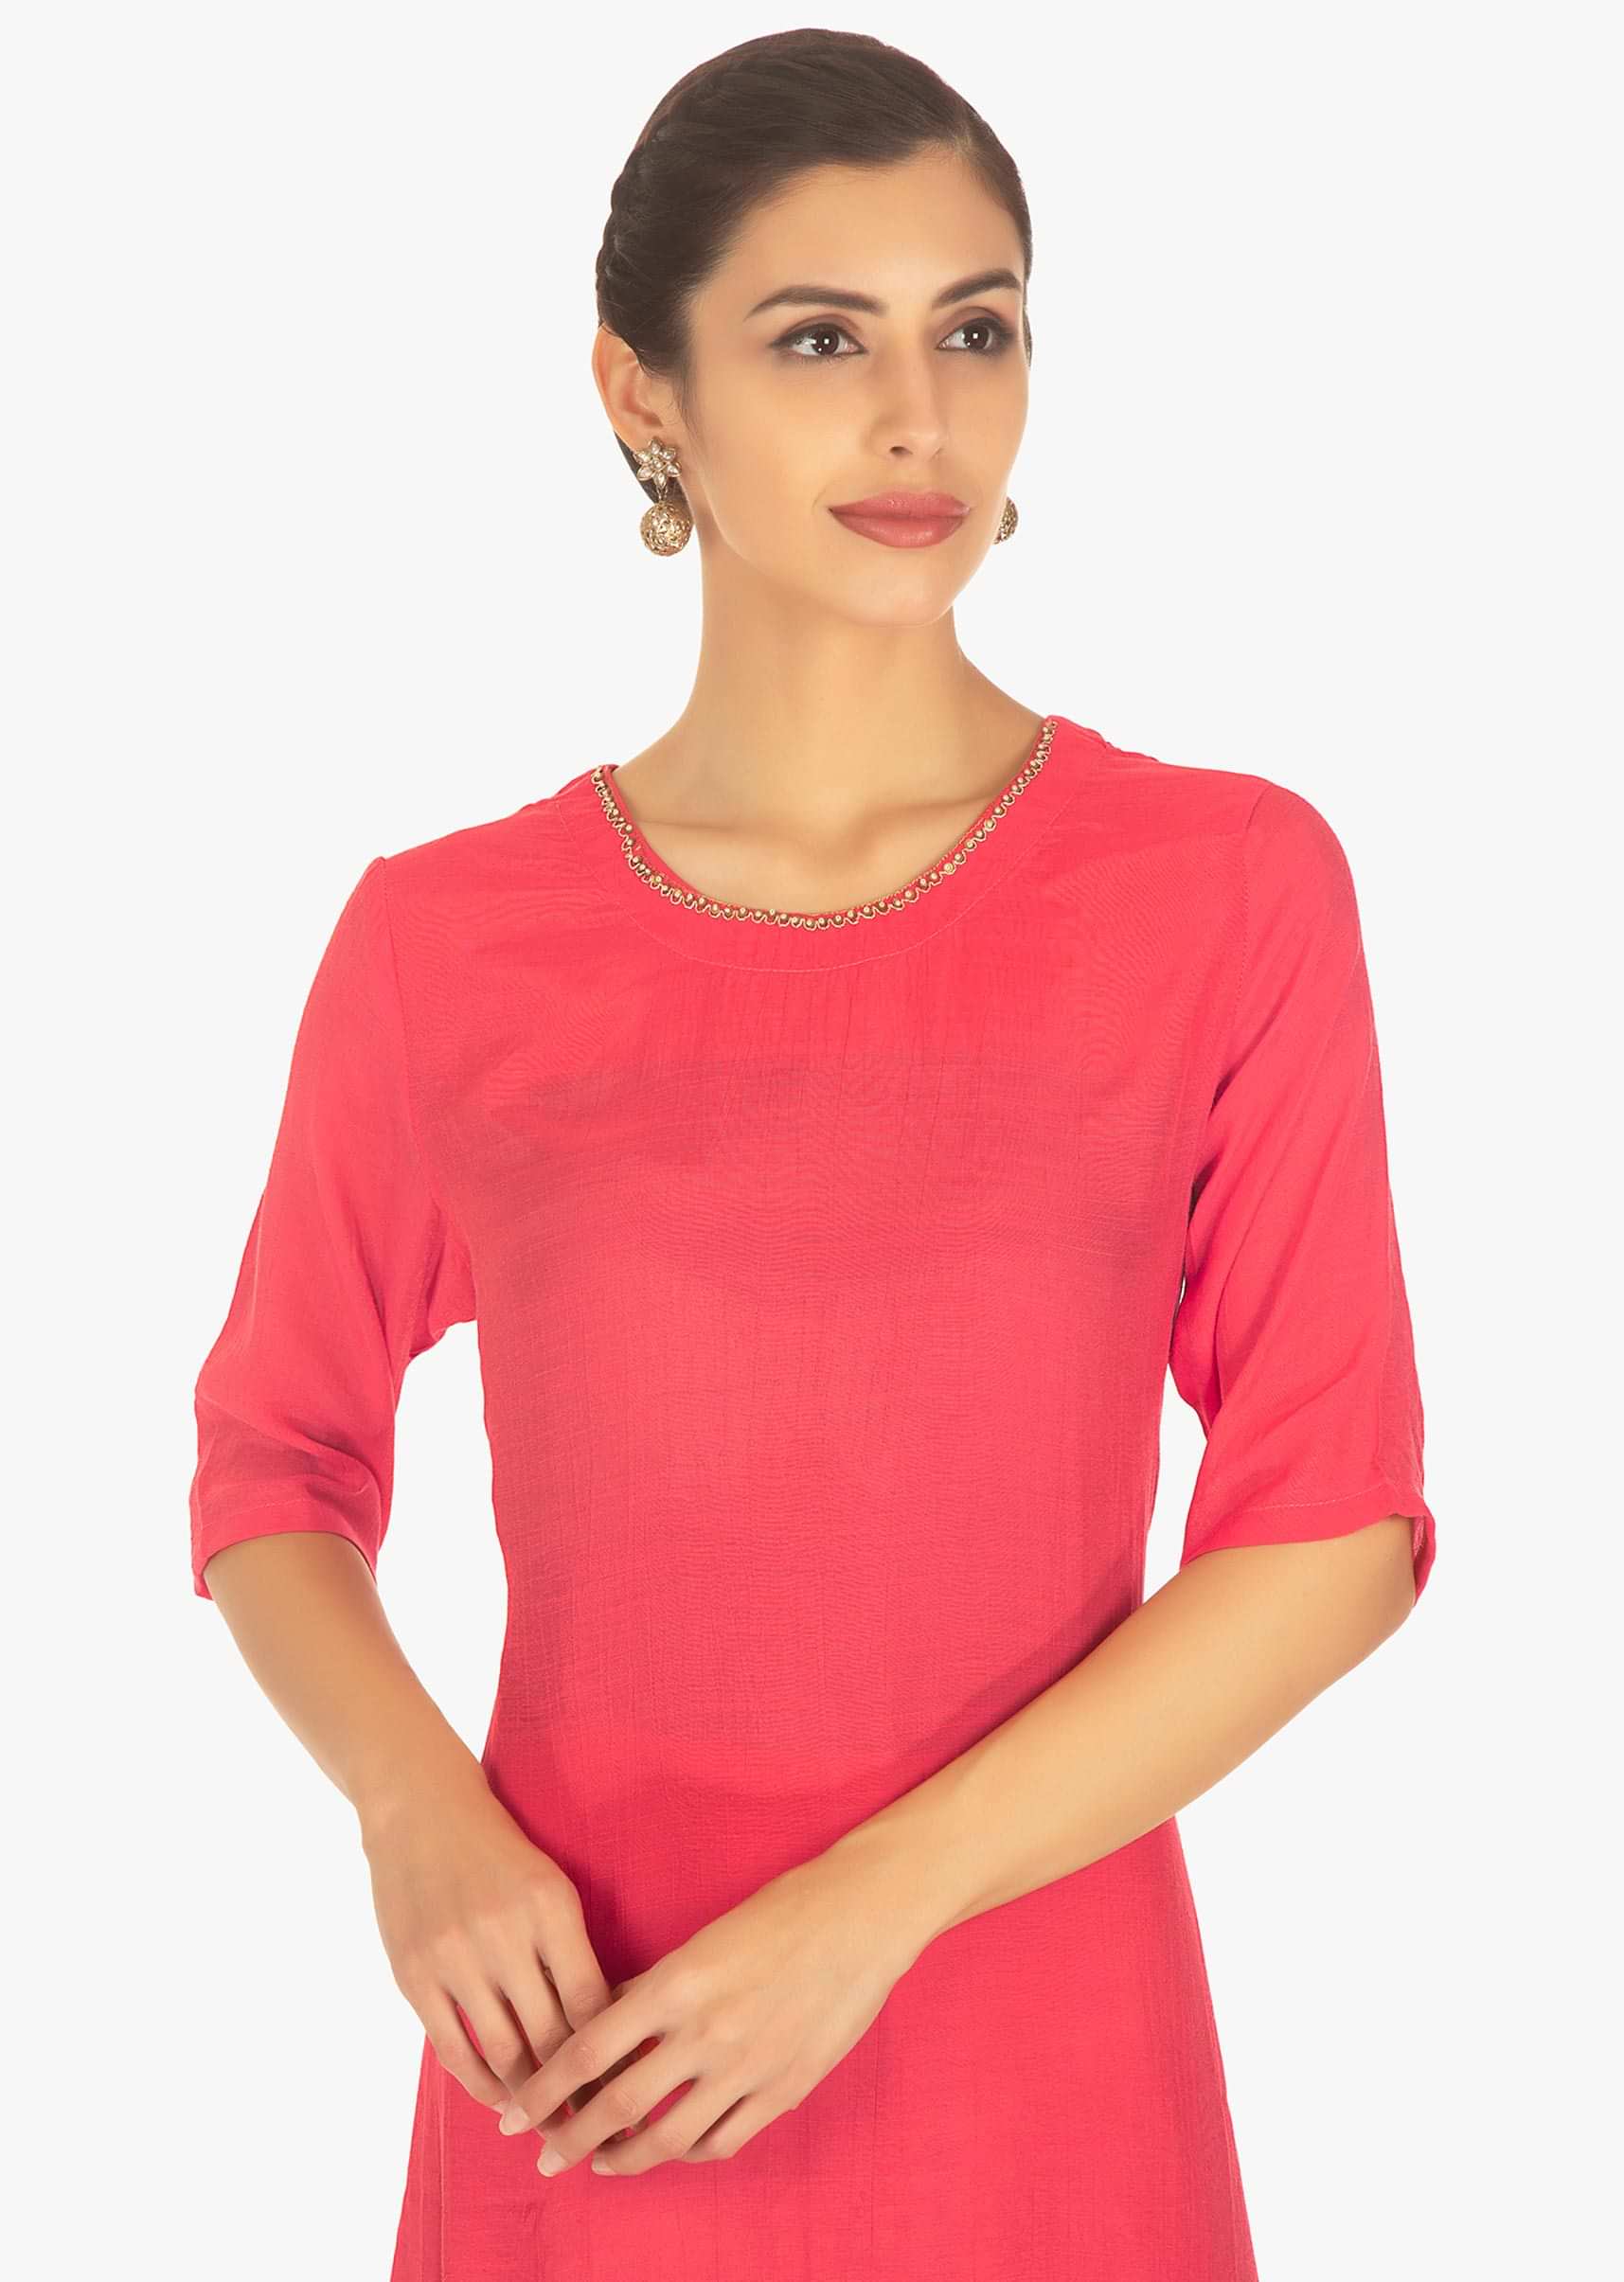 Coral pink silk top paired with a brown cotton dhoti pants